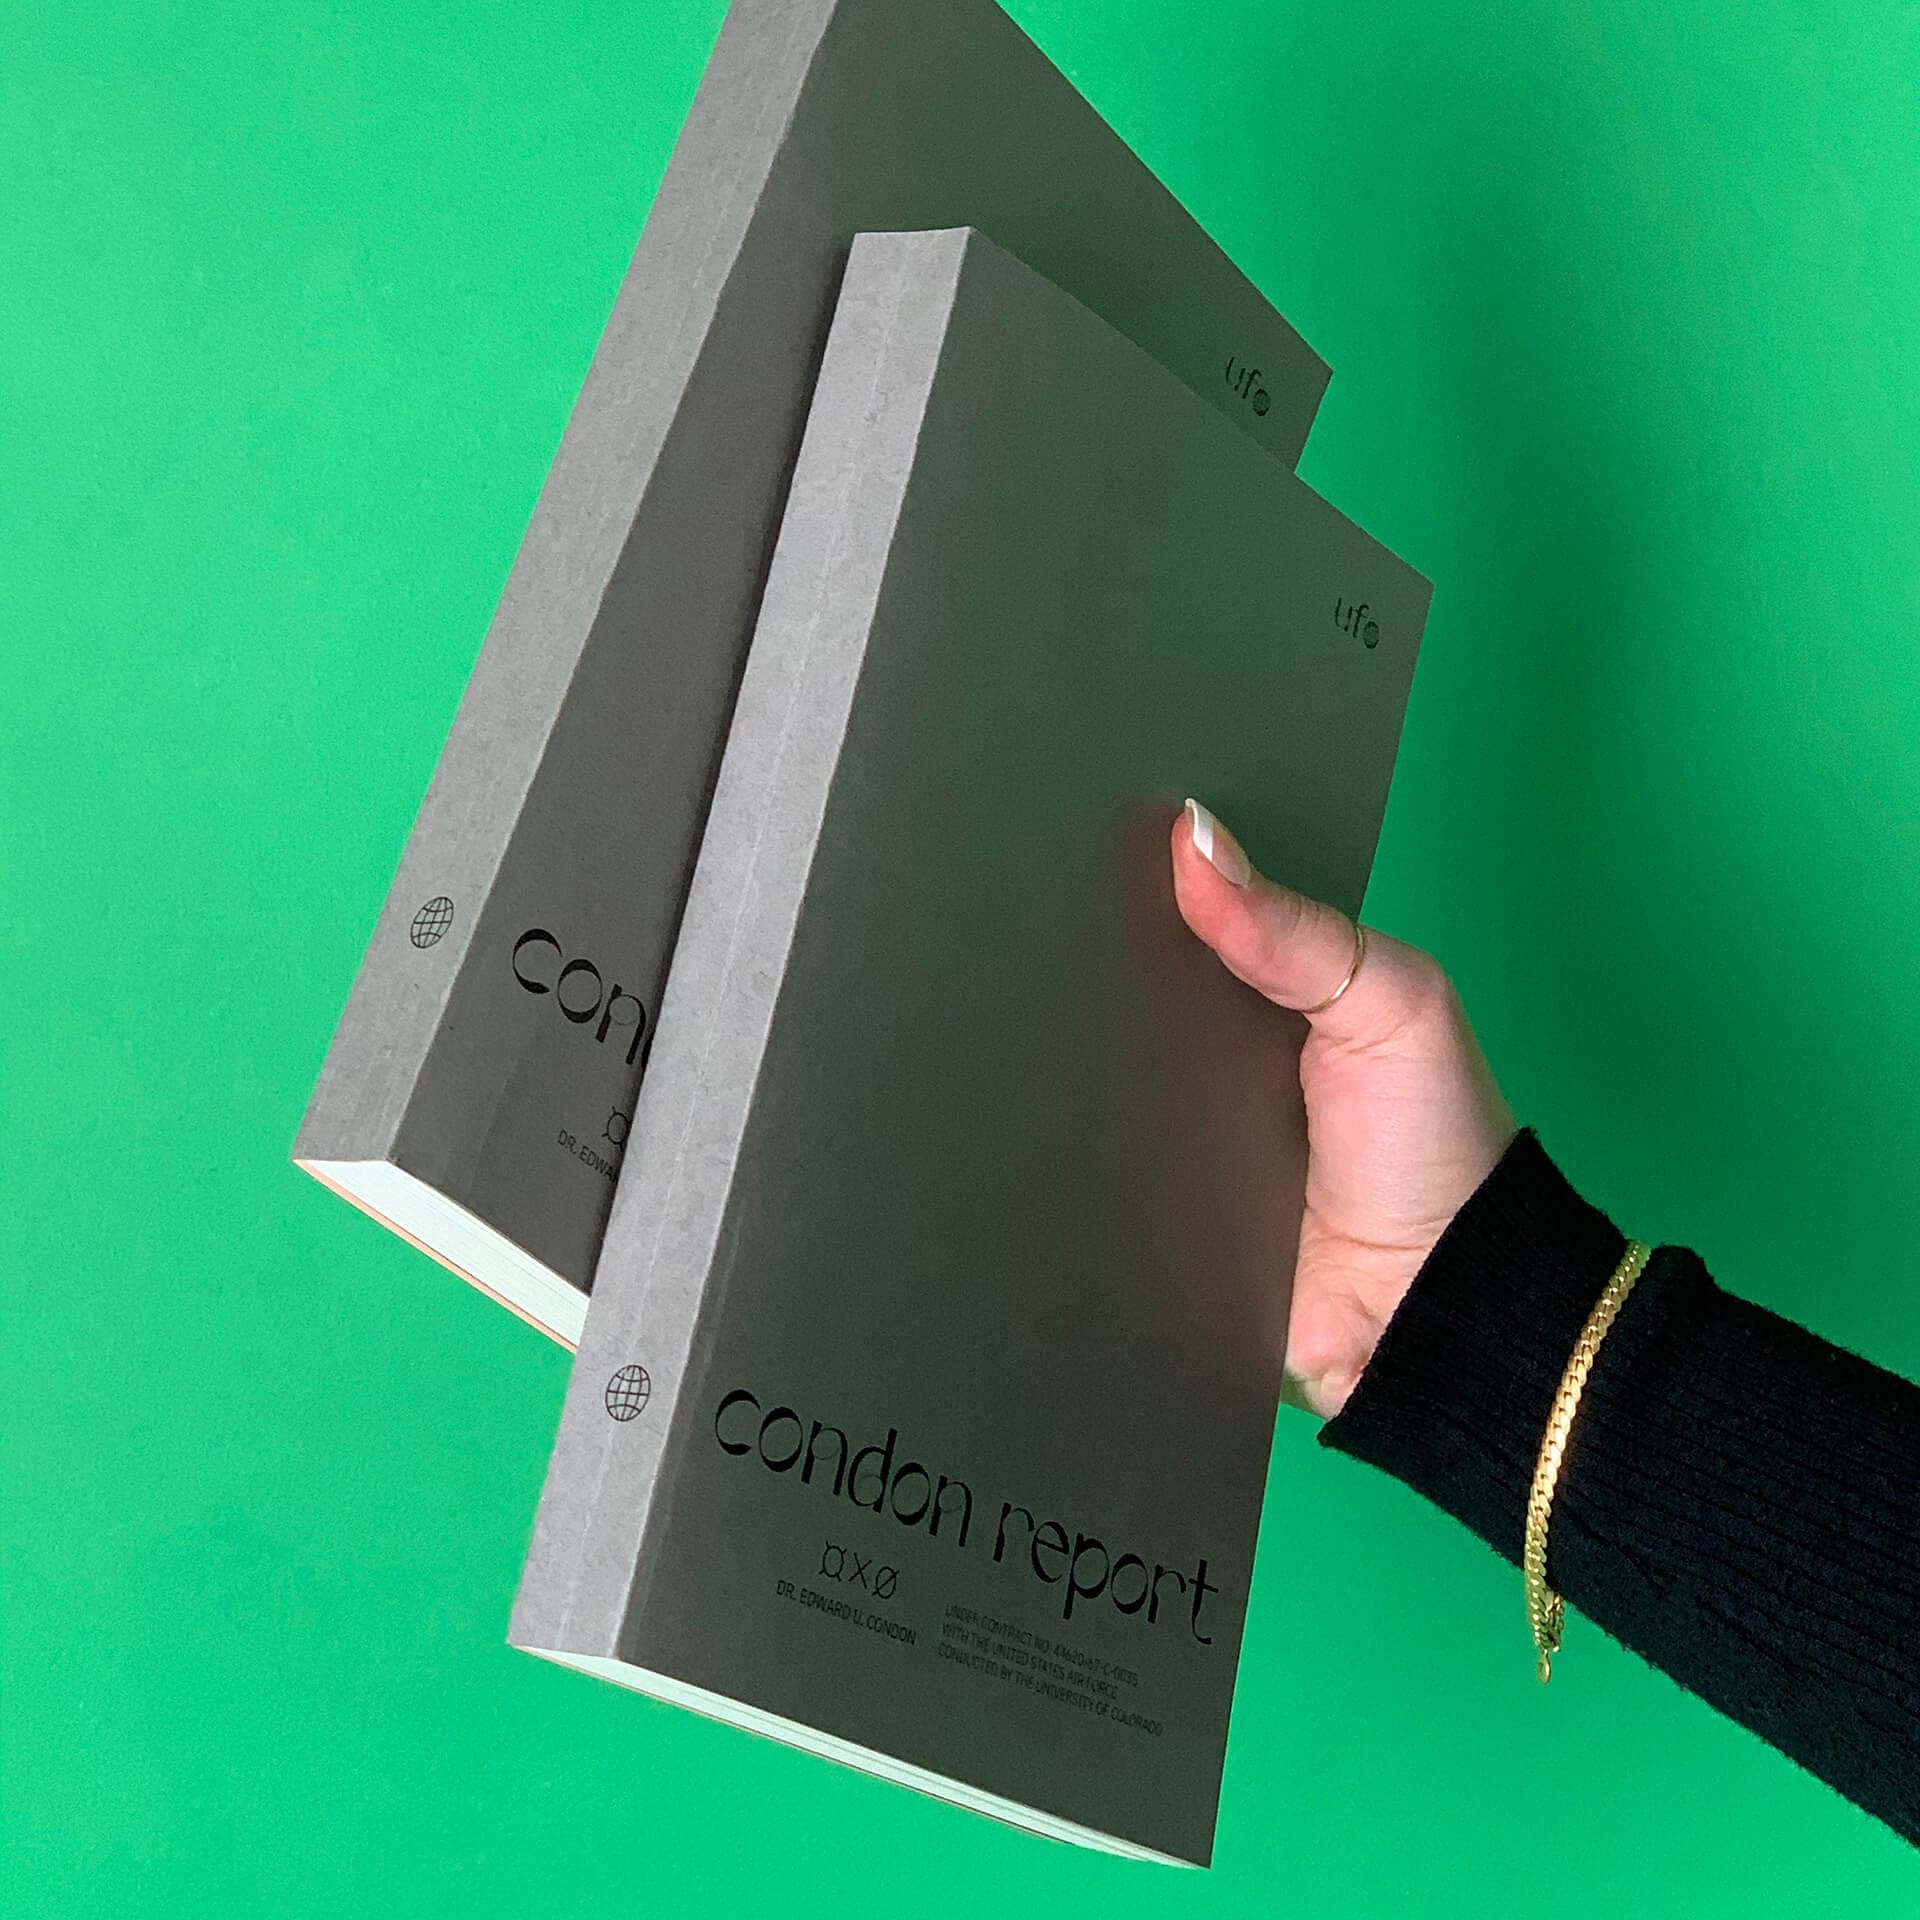 Photo of someone holding up two black books against a green wall with one hand. At the bottom of the books as the title "Condon Report" written in black glossy text.